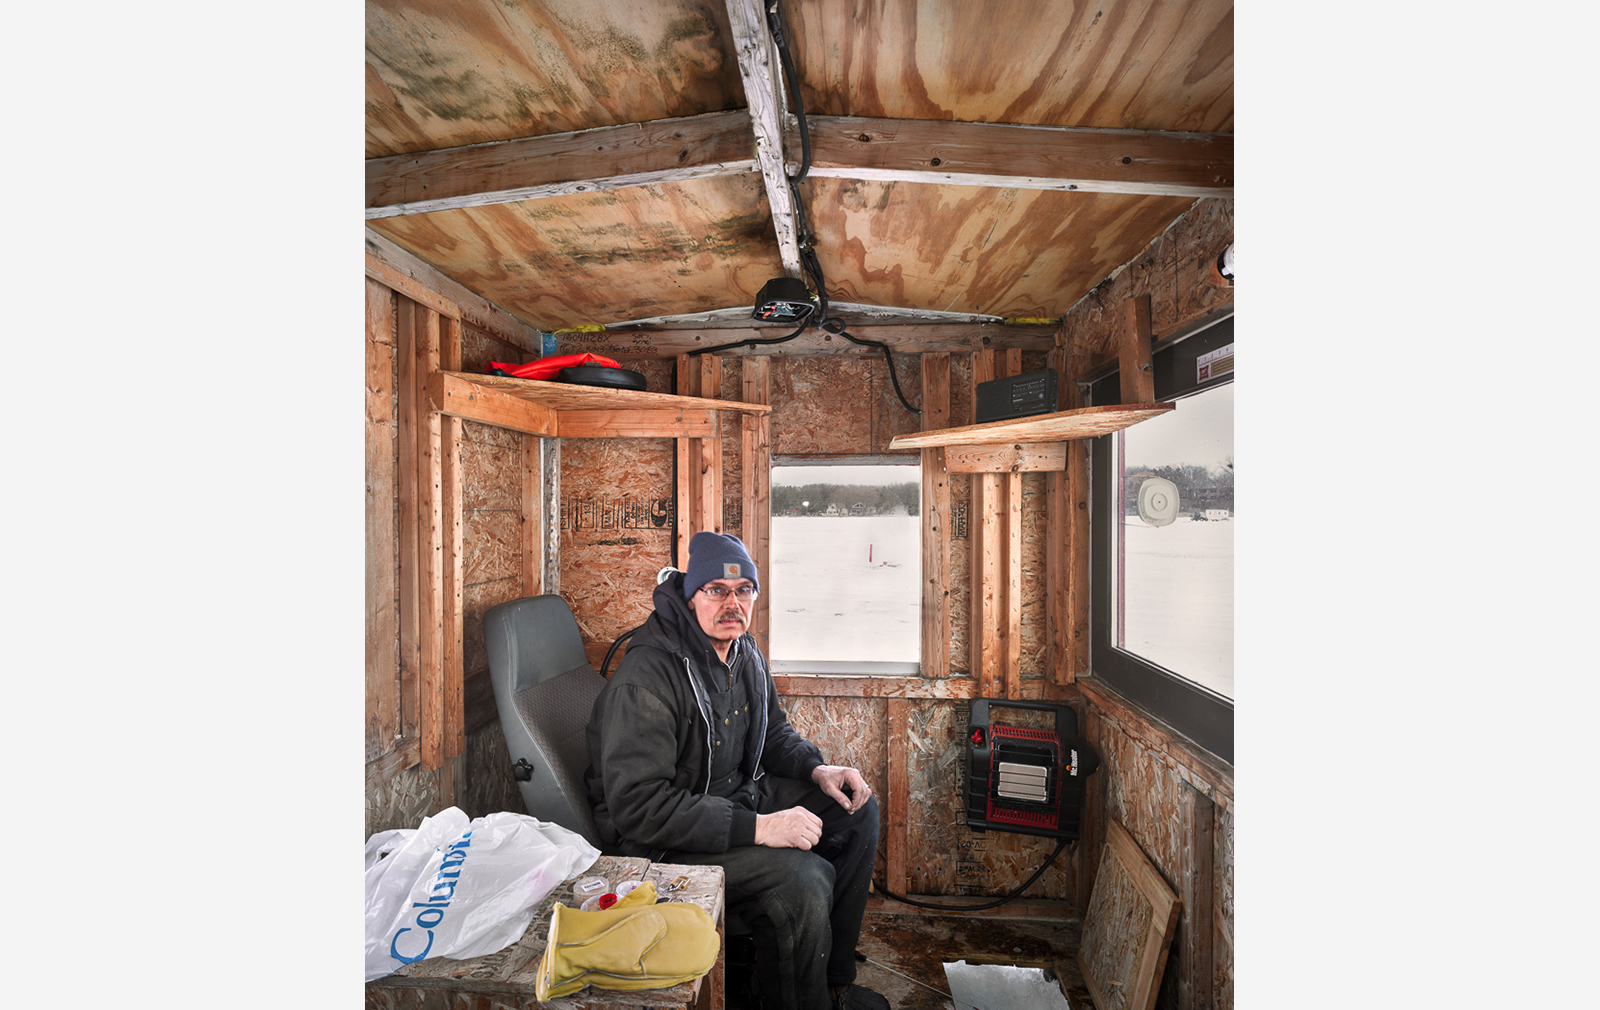 Mike Rebholz Photographs The Ice Fishing Huts Of Wisconsin The